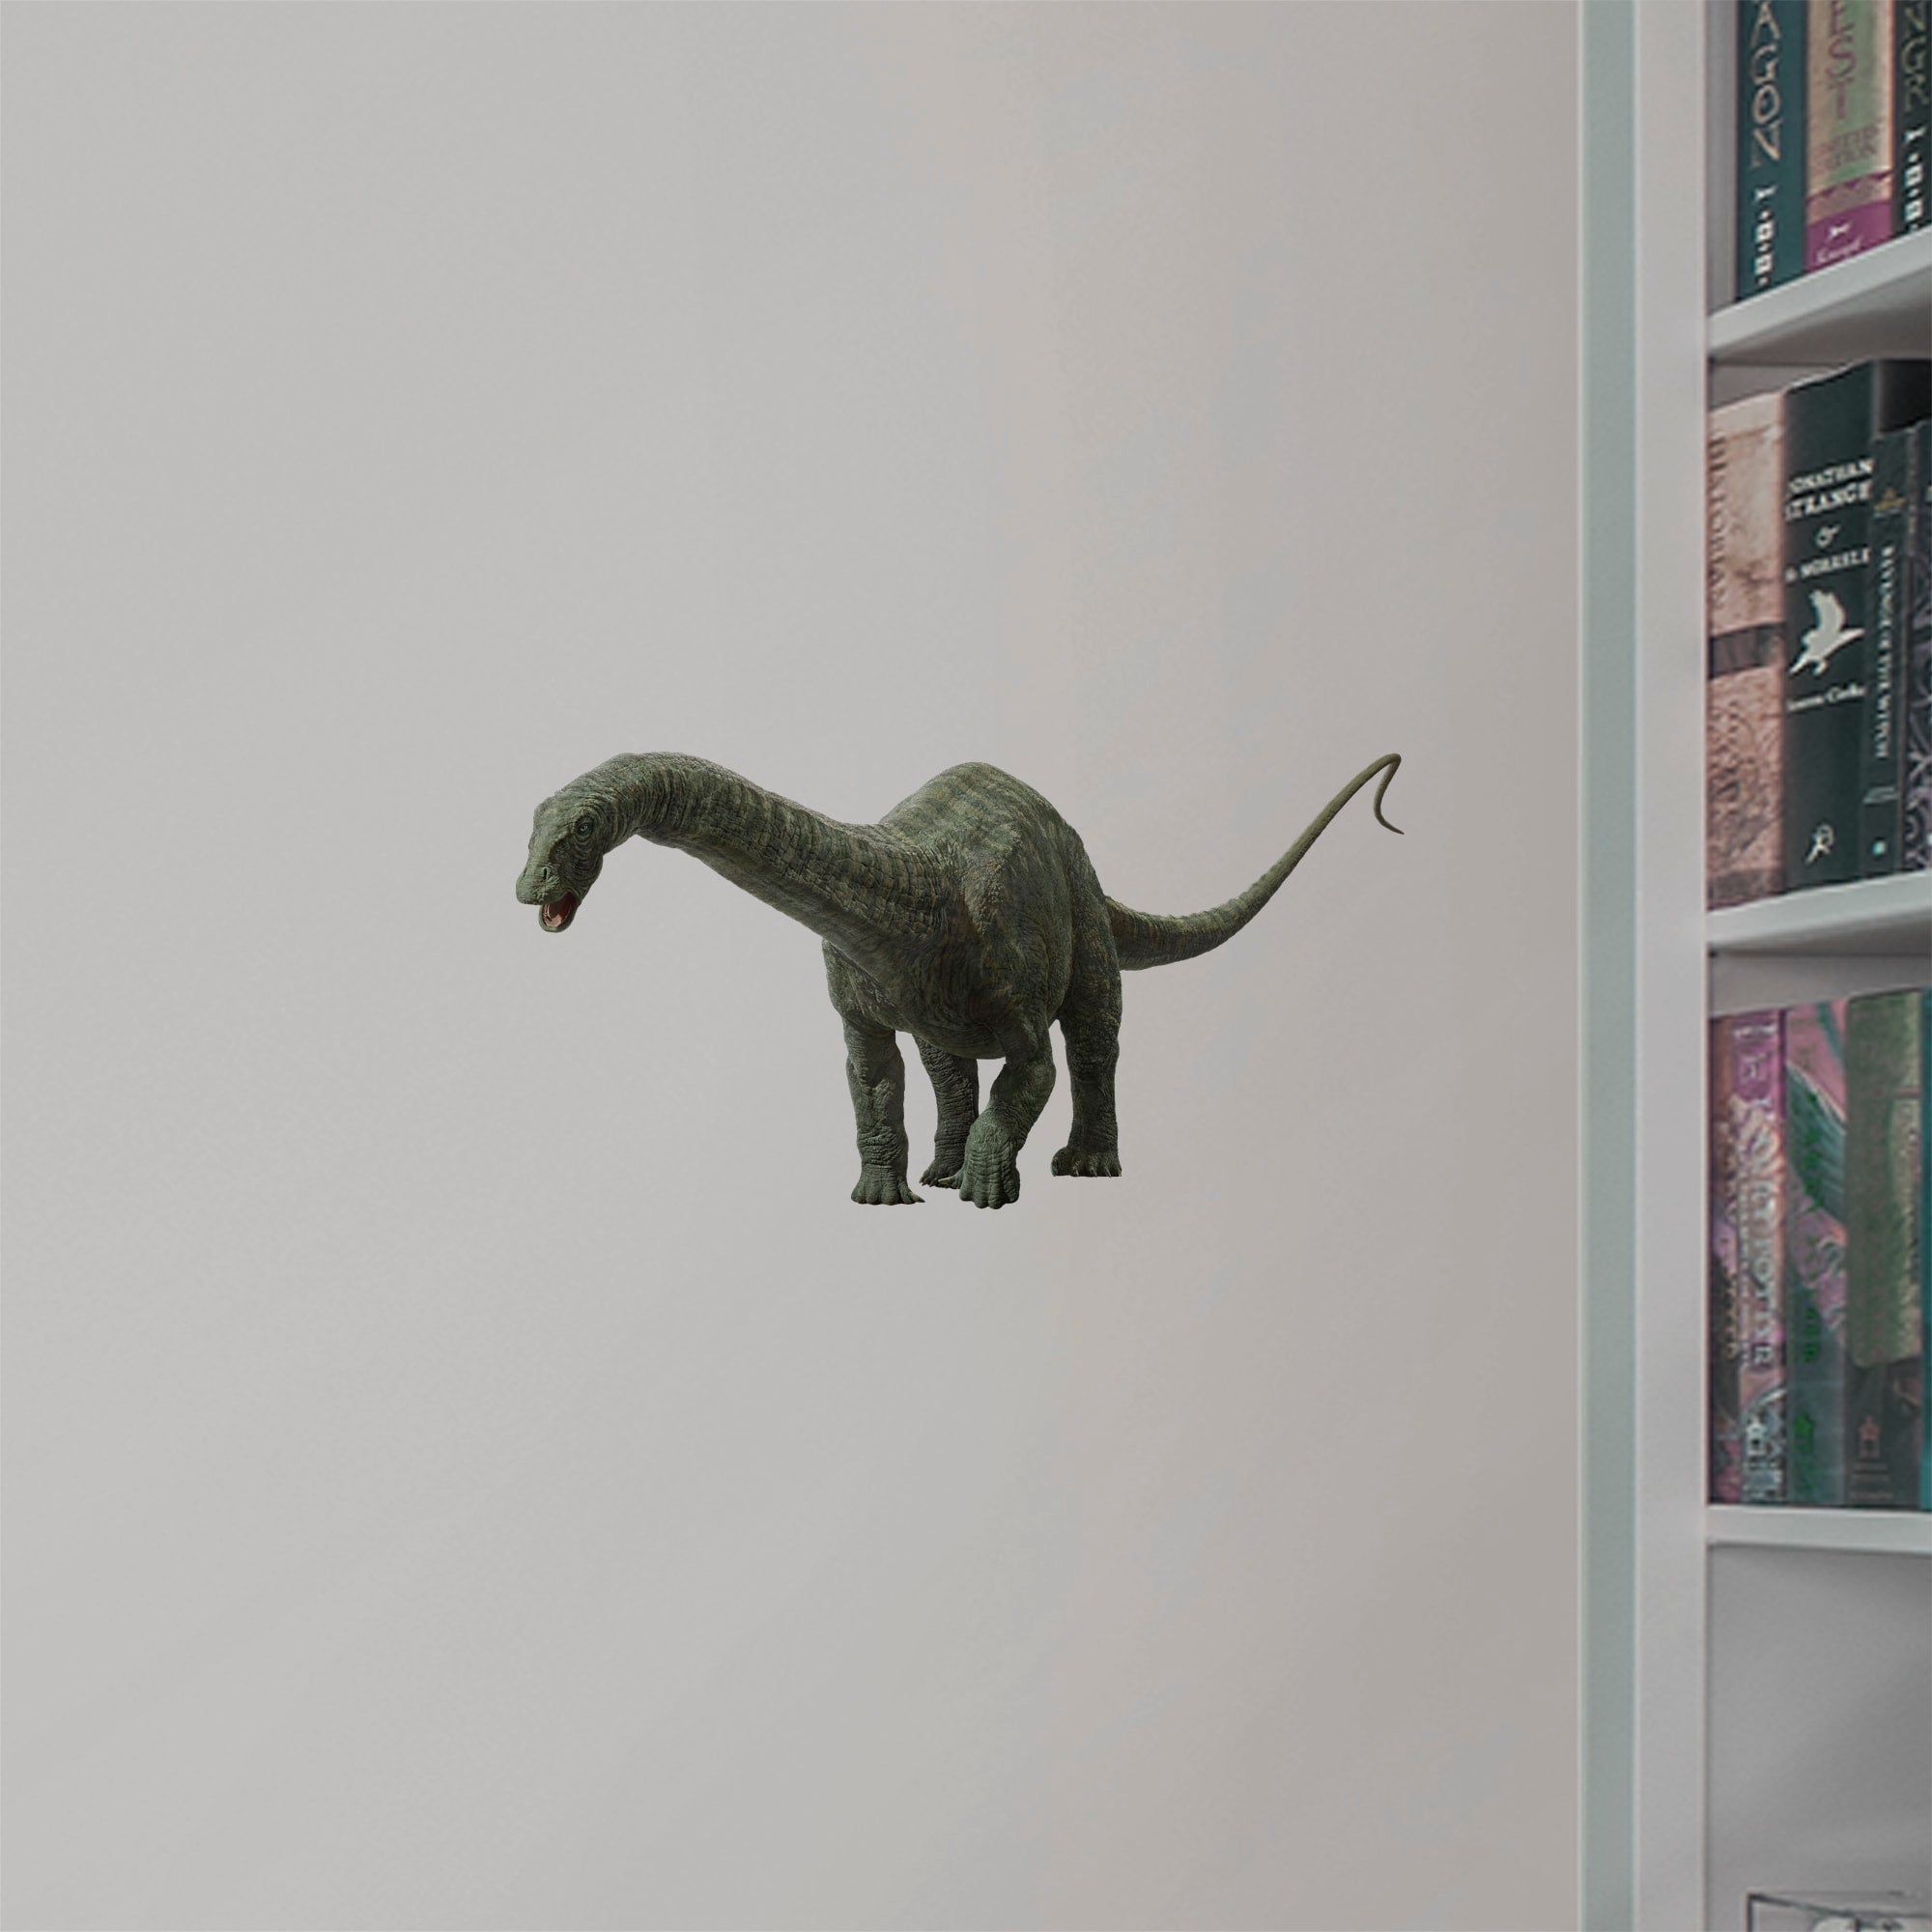 Apatosaurus - Jurassic World: Fallen Kingdom - Officially Licensed Removable Wall Decal Large by Fathead | Vinyl